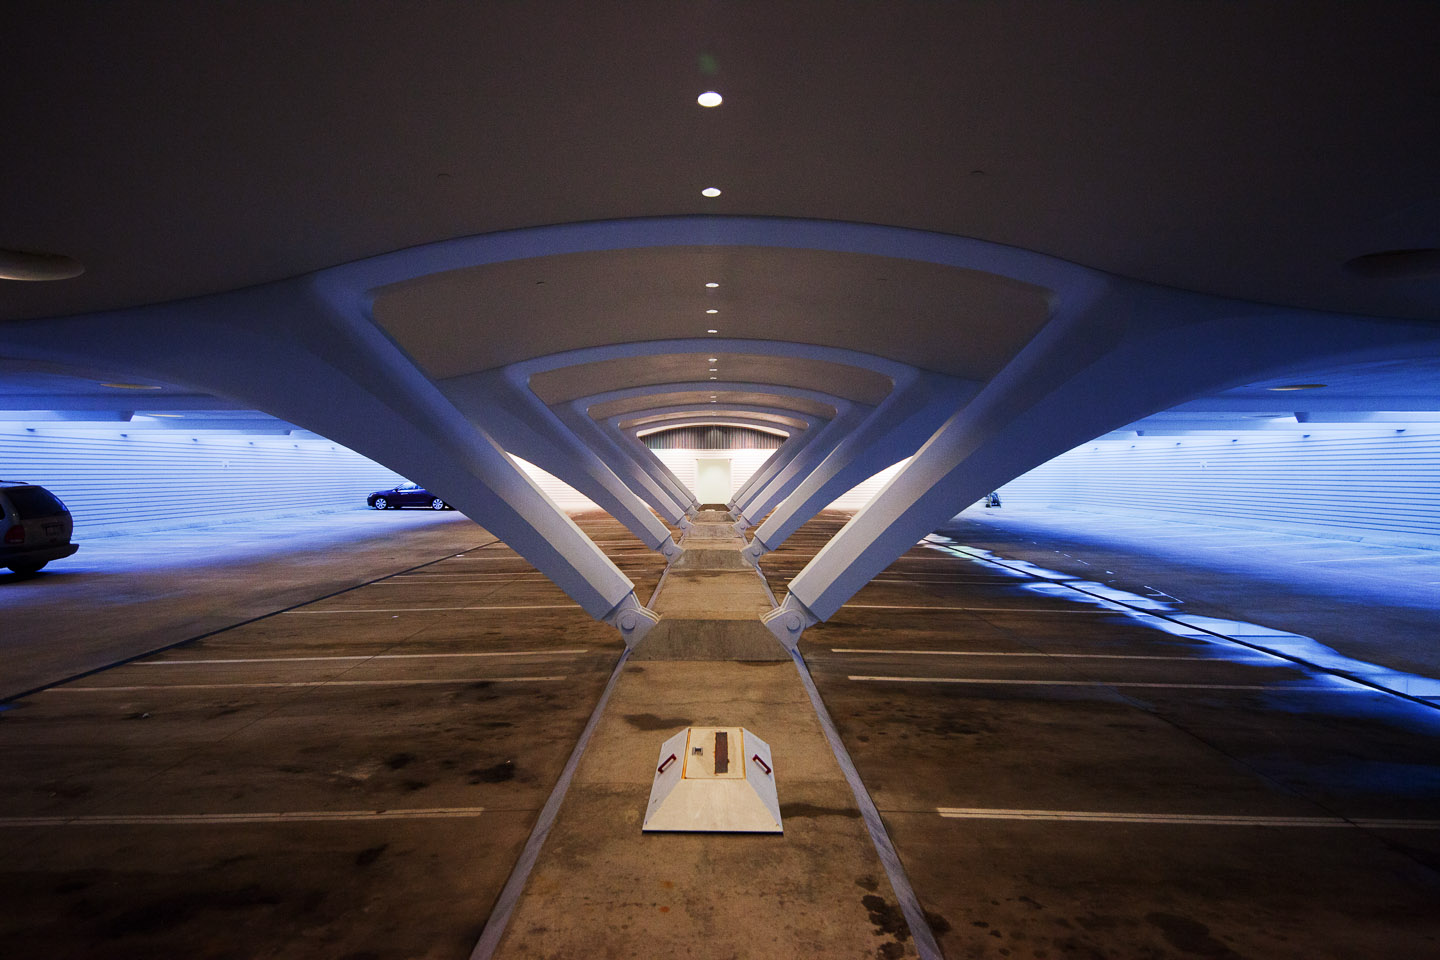 the underground parking structure of the Milwaukee Art Museum, designed by Santiago Calatrava, photographed by Jacob Rosenfeld